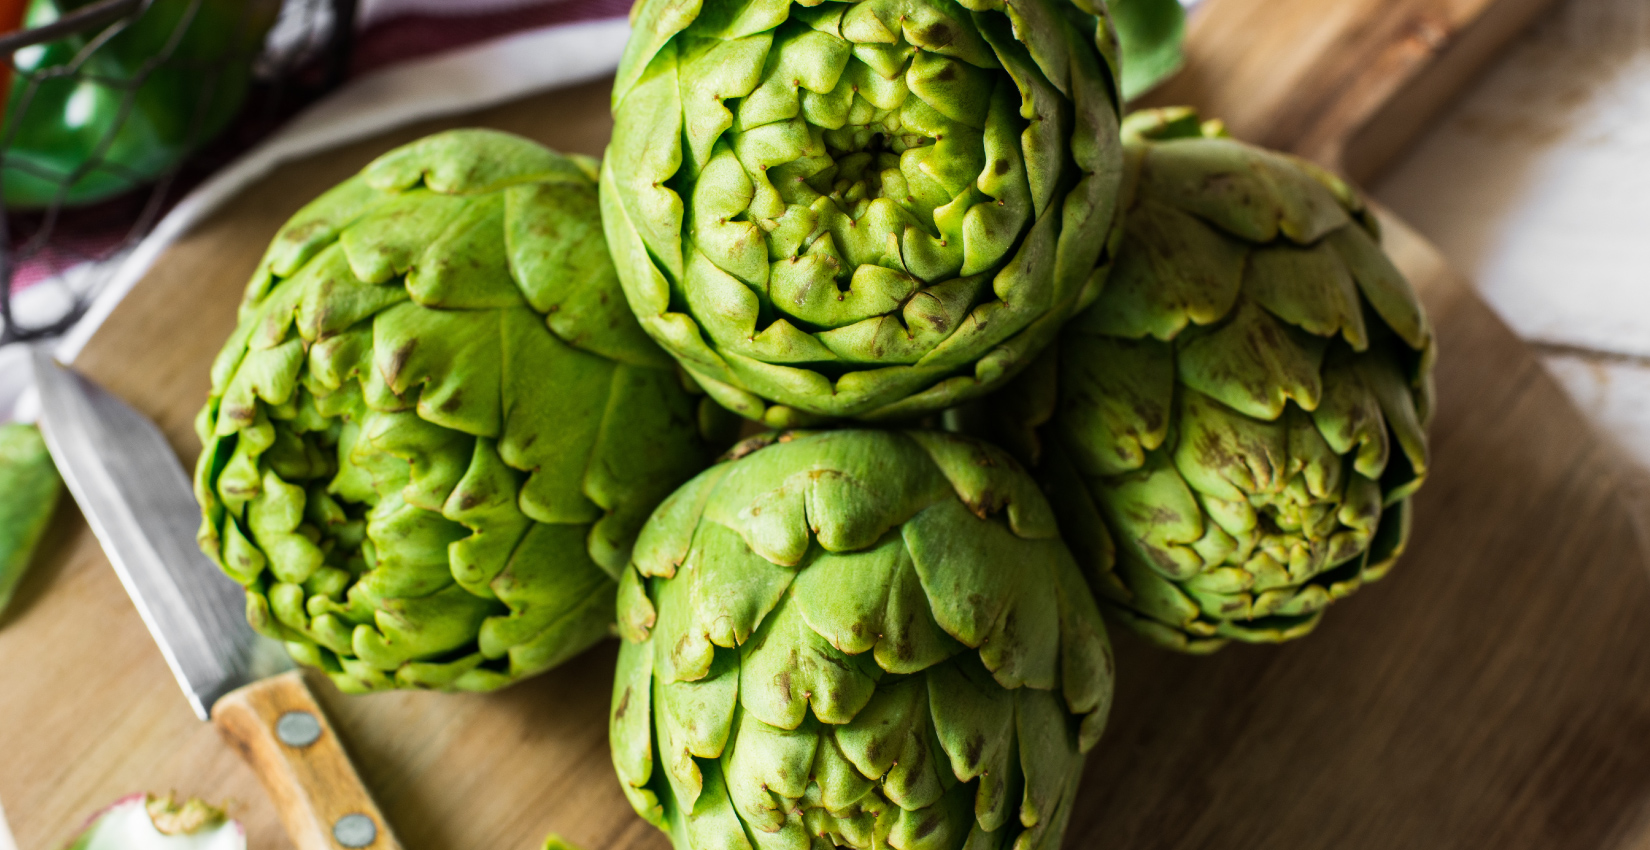 an image of four artichokes stacked on a cutting board